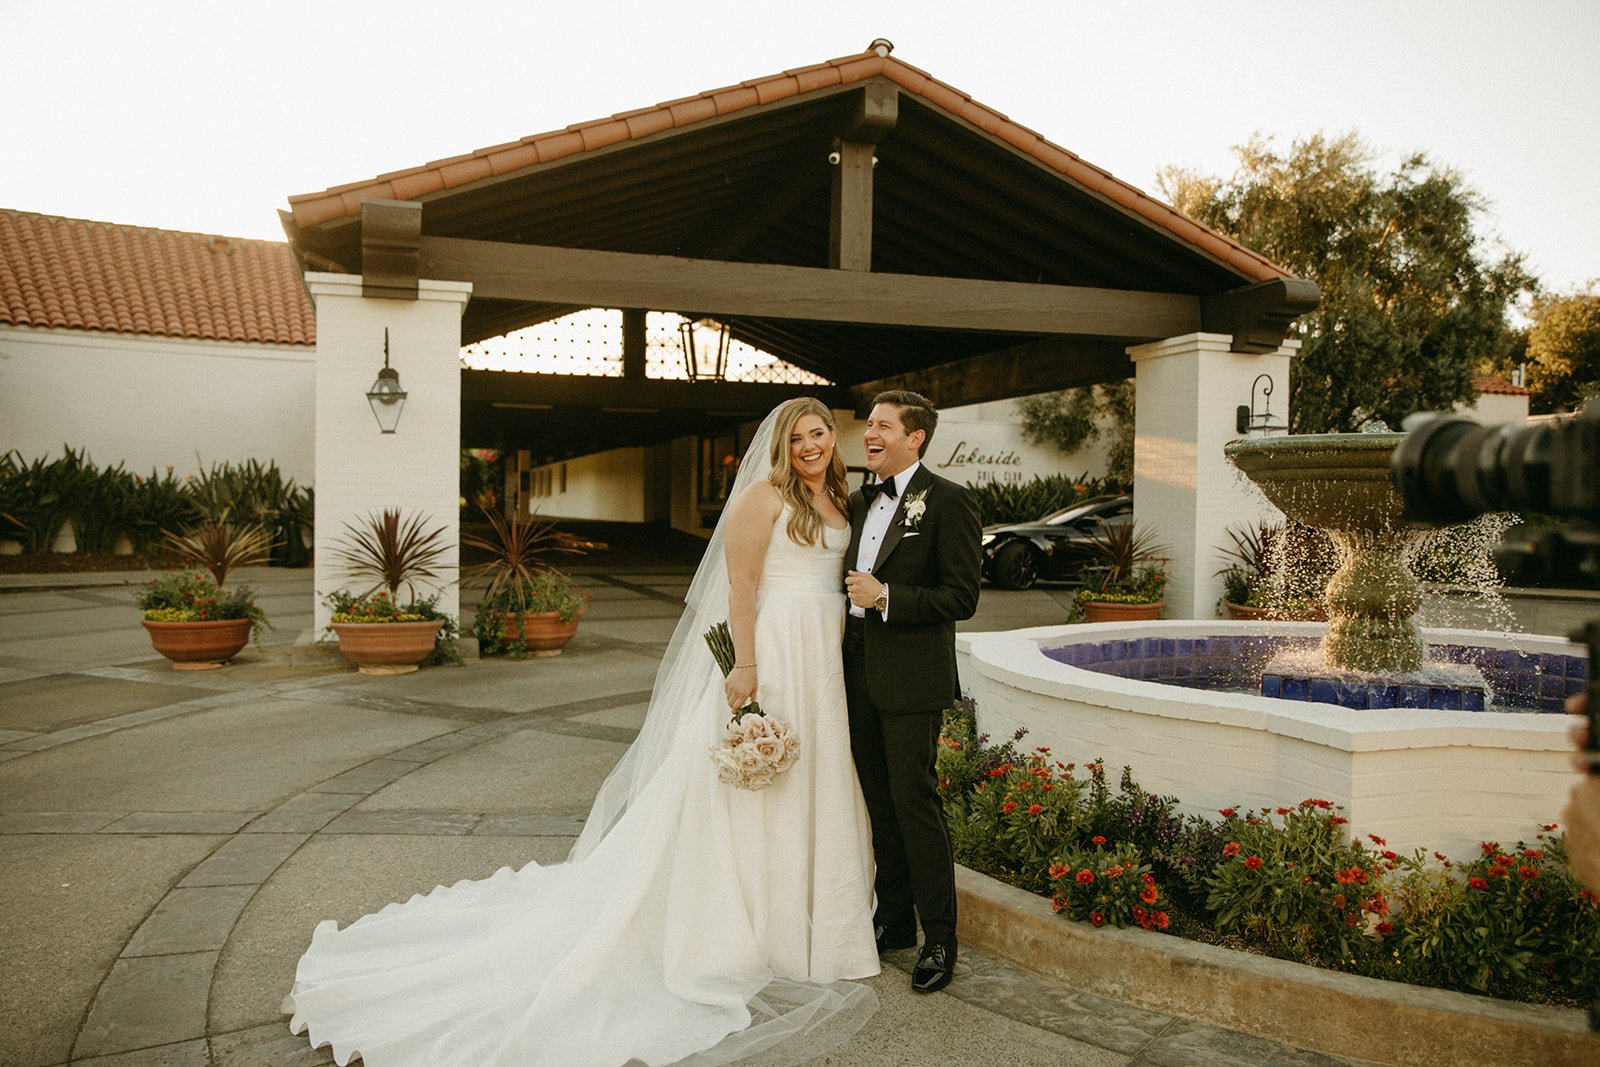 Luxury bride and groom portraits for an outdoor wedding